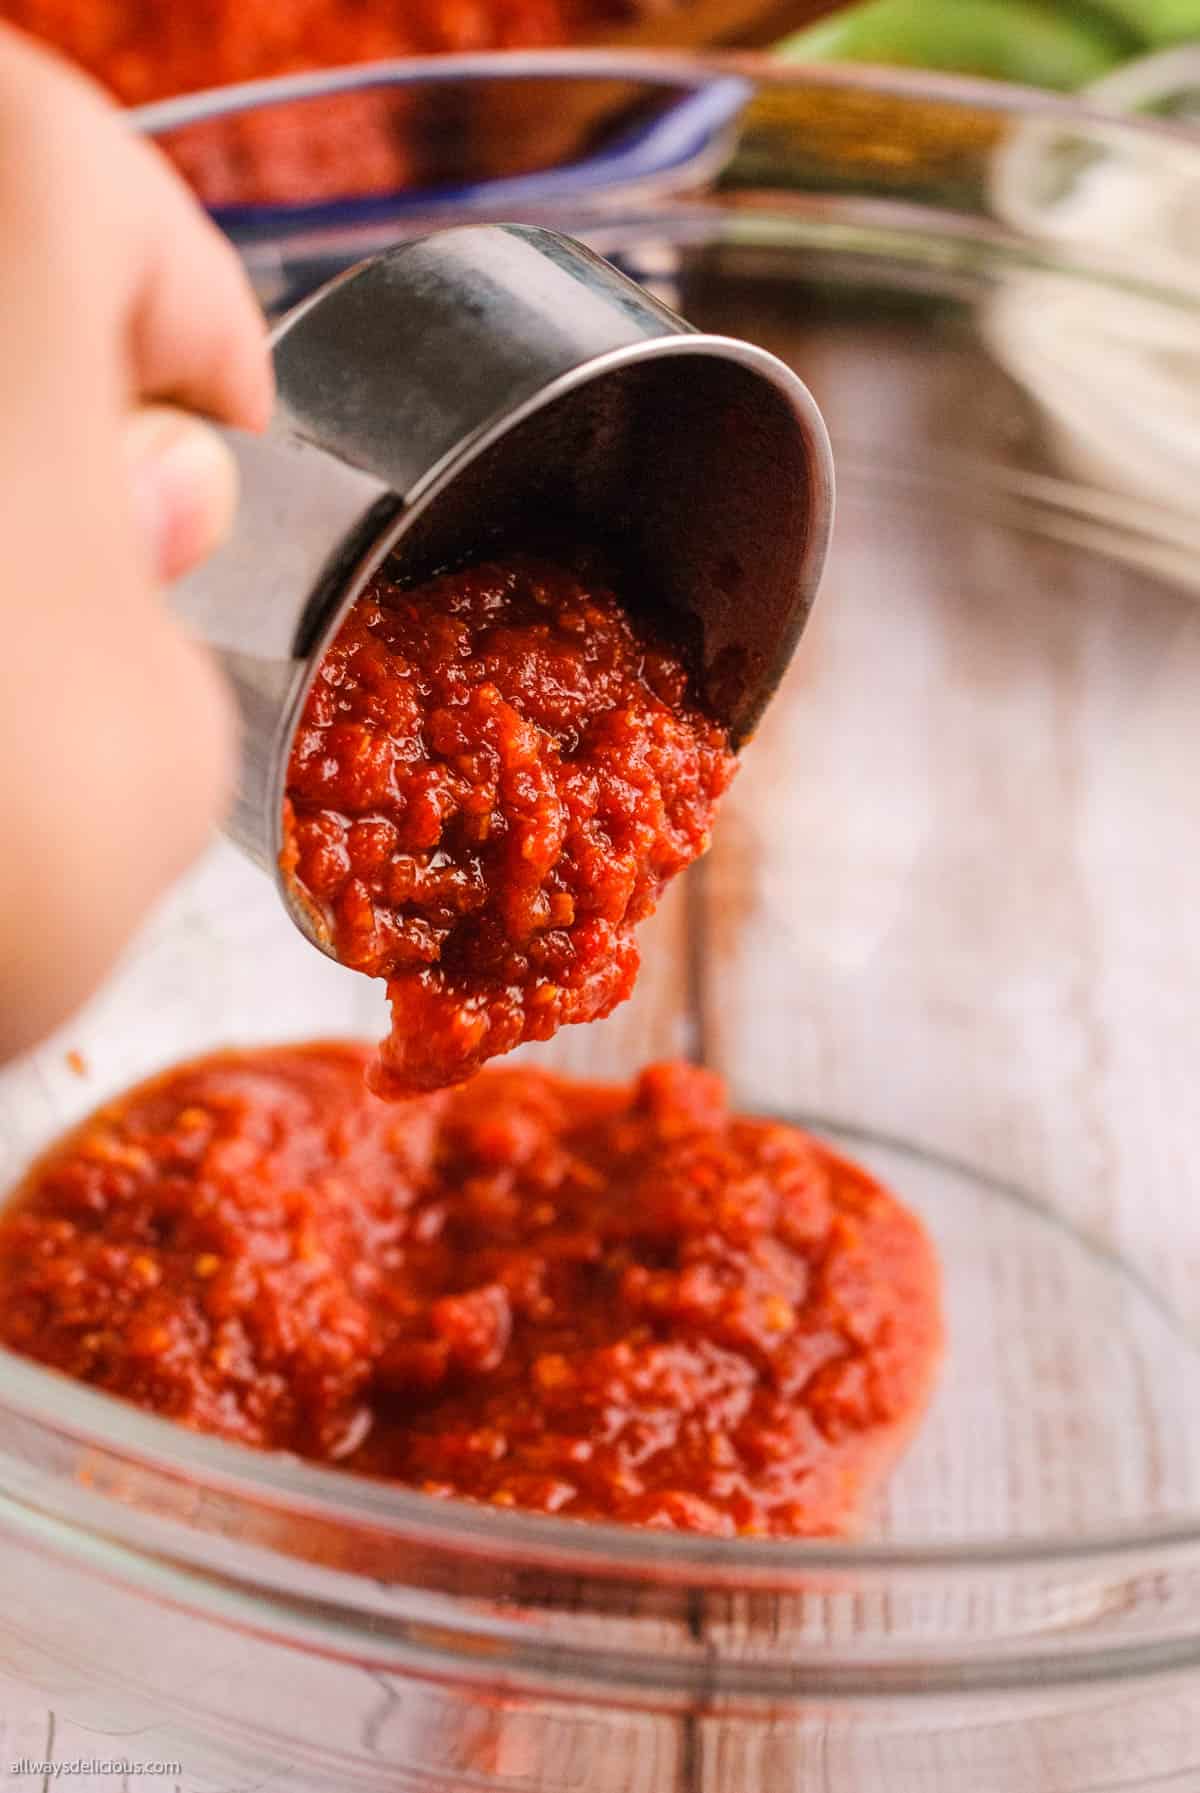 low angle shot of a hand pouring harissa paste from a measuring cup into a bowl